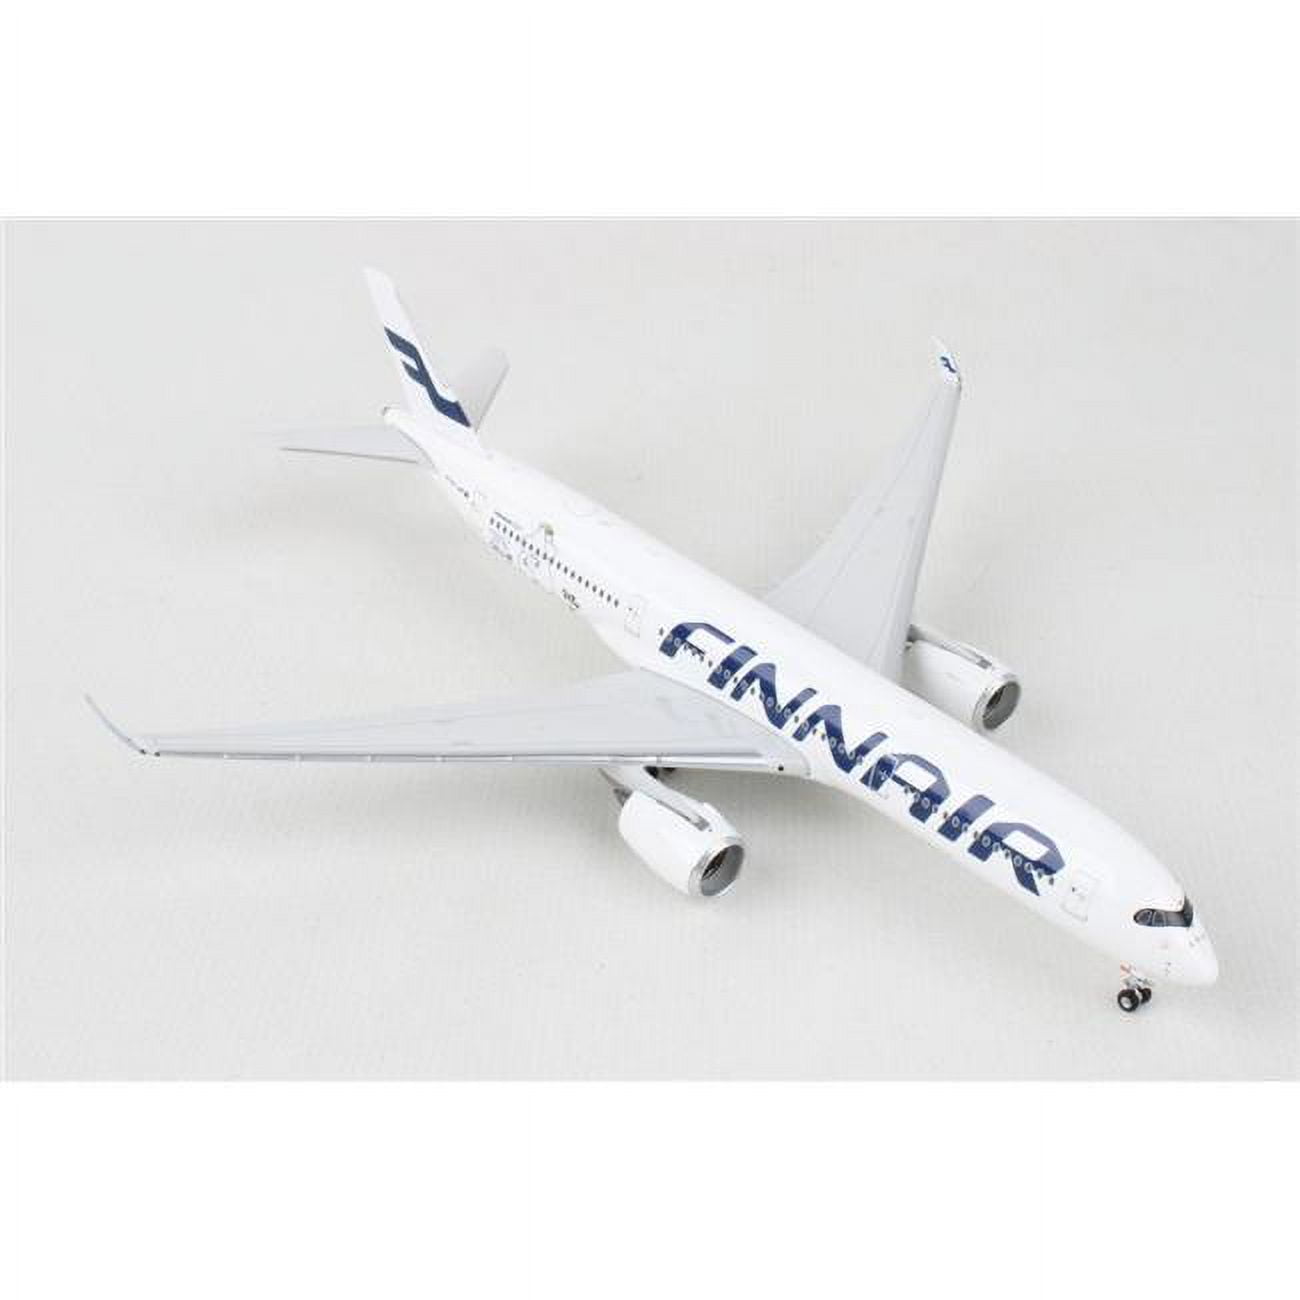 Picture of Phoenix PH2383 1-400 Scale Finnair A350-900 Reg No.OH-LWP Moomin Model Airplane